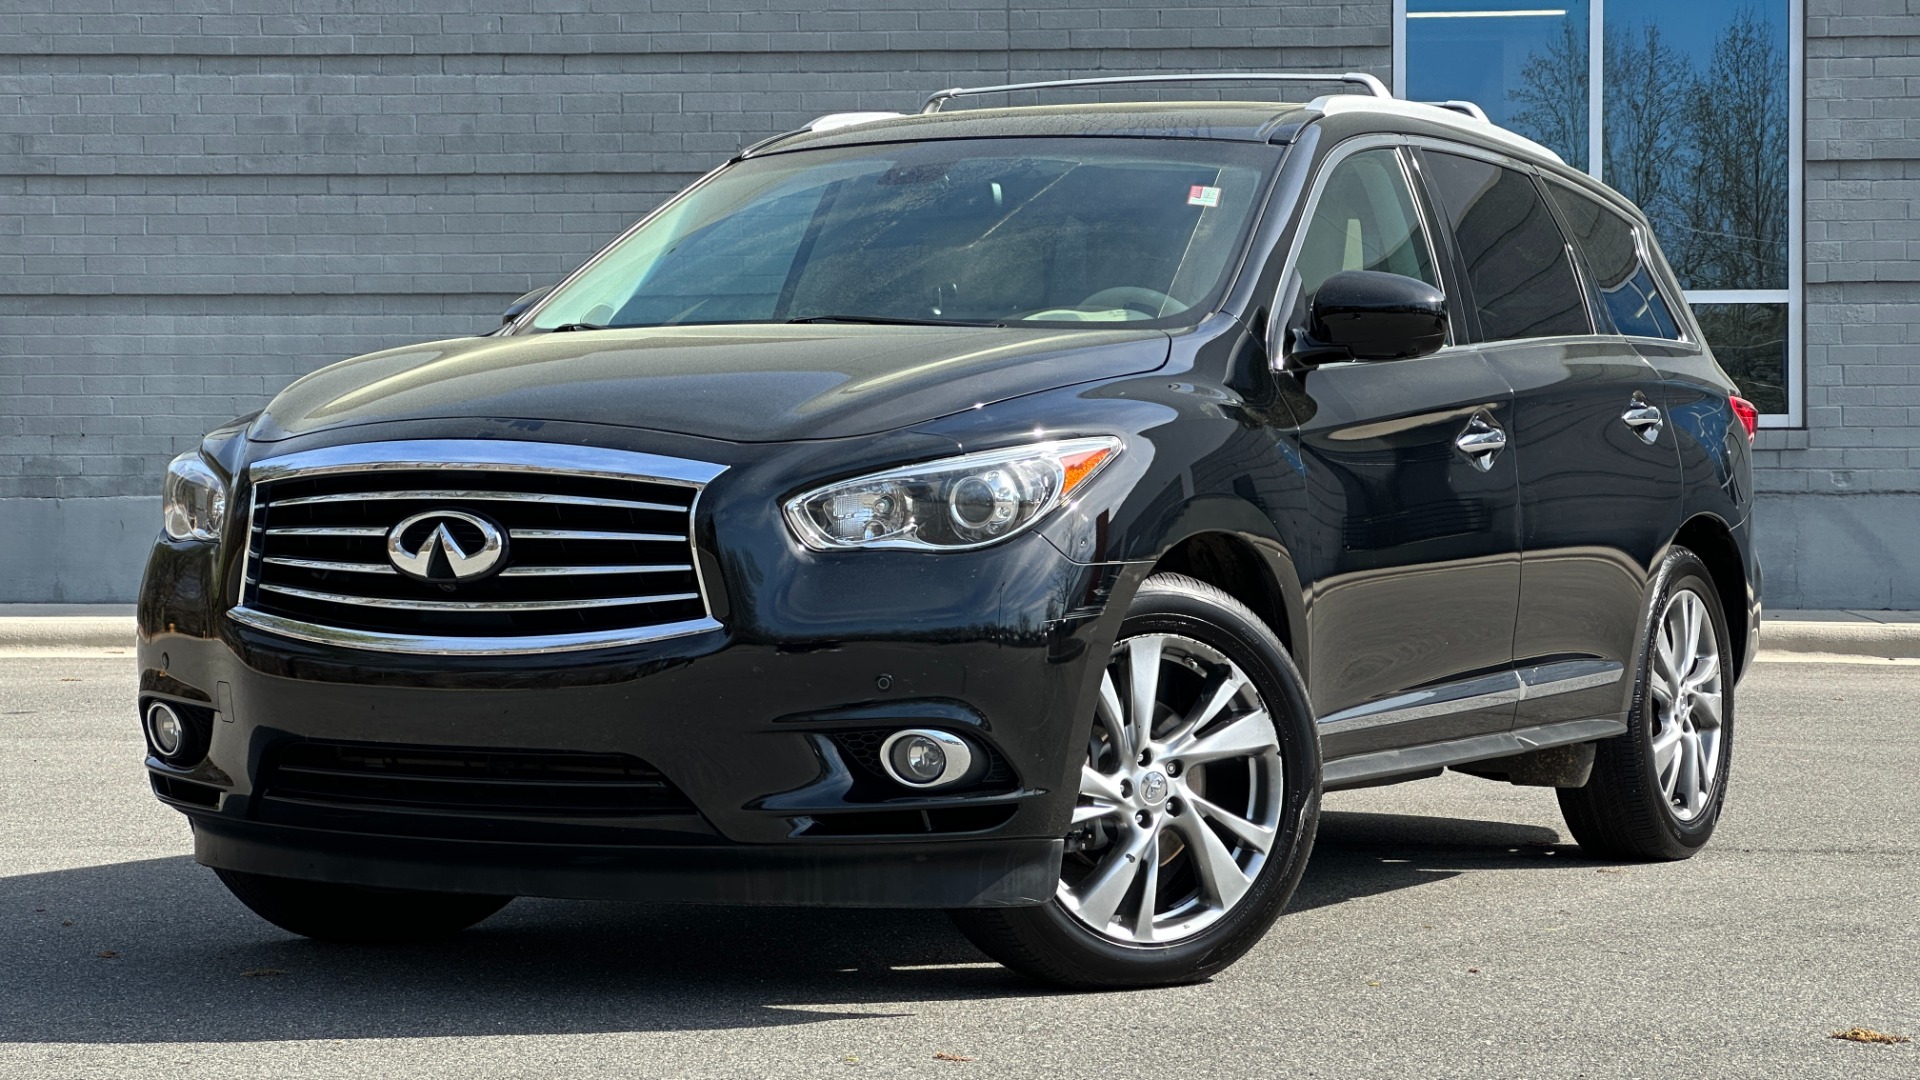 Used 2013 INFINITI JX35 AWD / DVD THEATER PKG / PREMIUM / DELUXE TECH / CARGO / TECH PKG for sale Sold at Formula Imports in Charlotte NC 28227 1